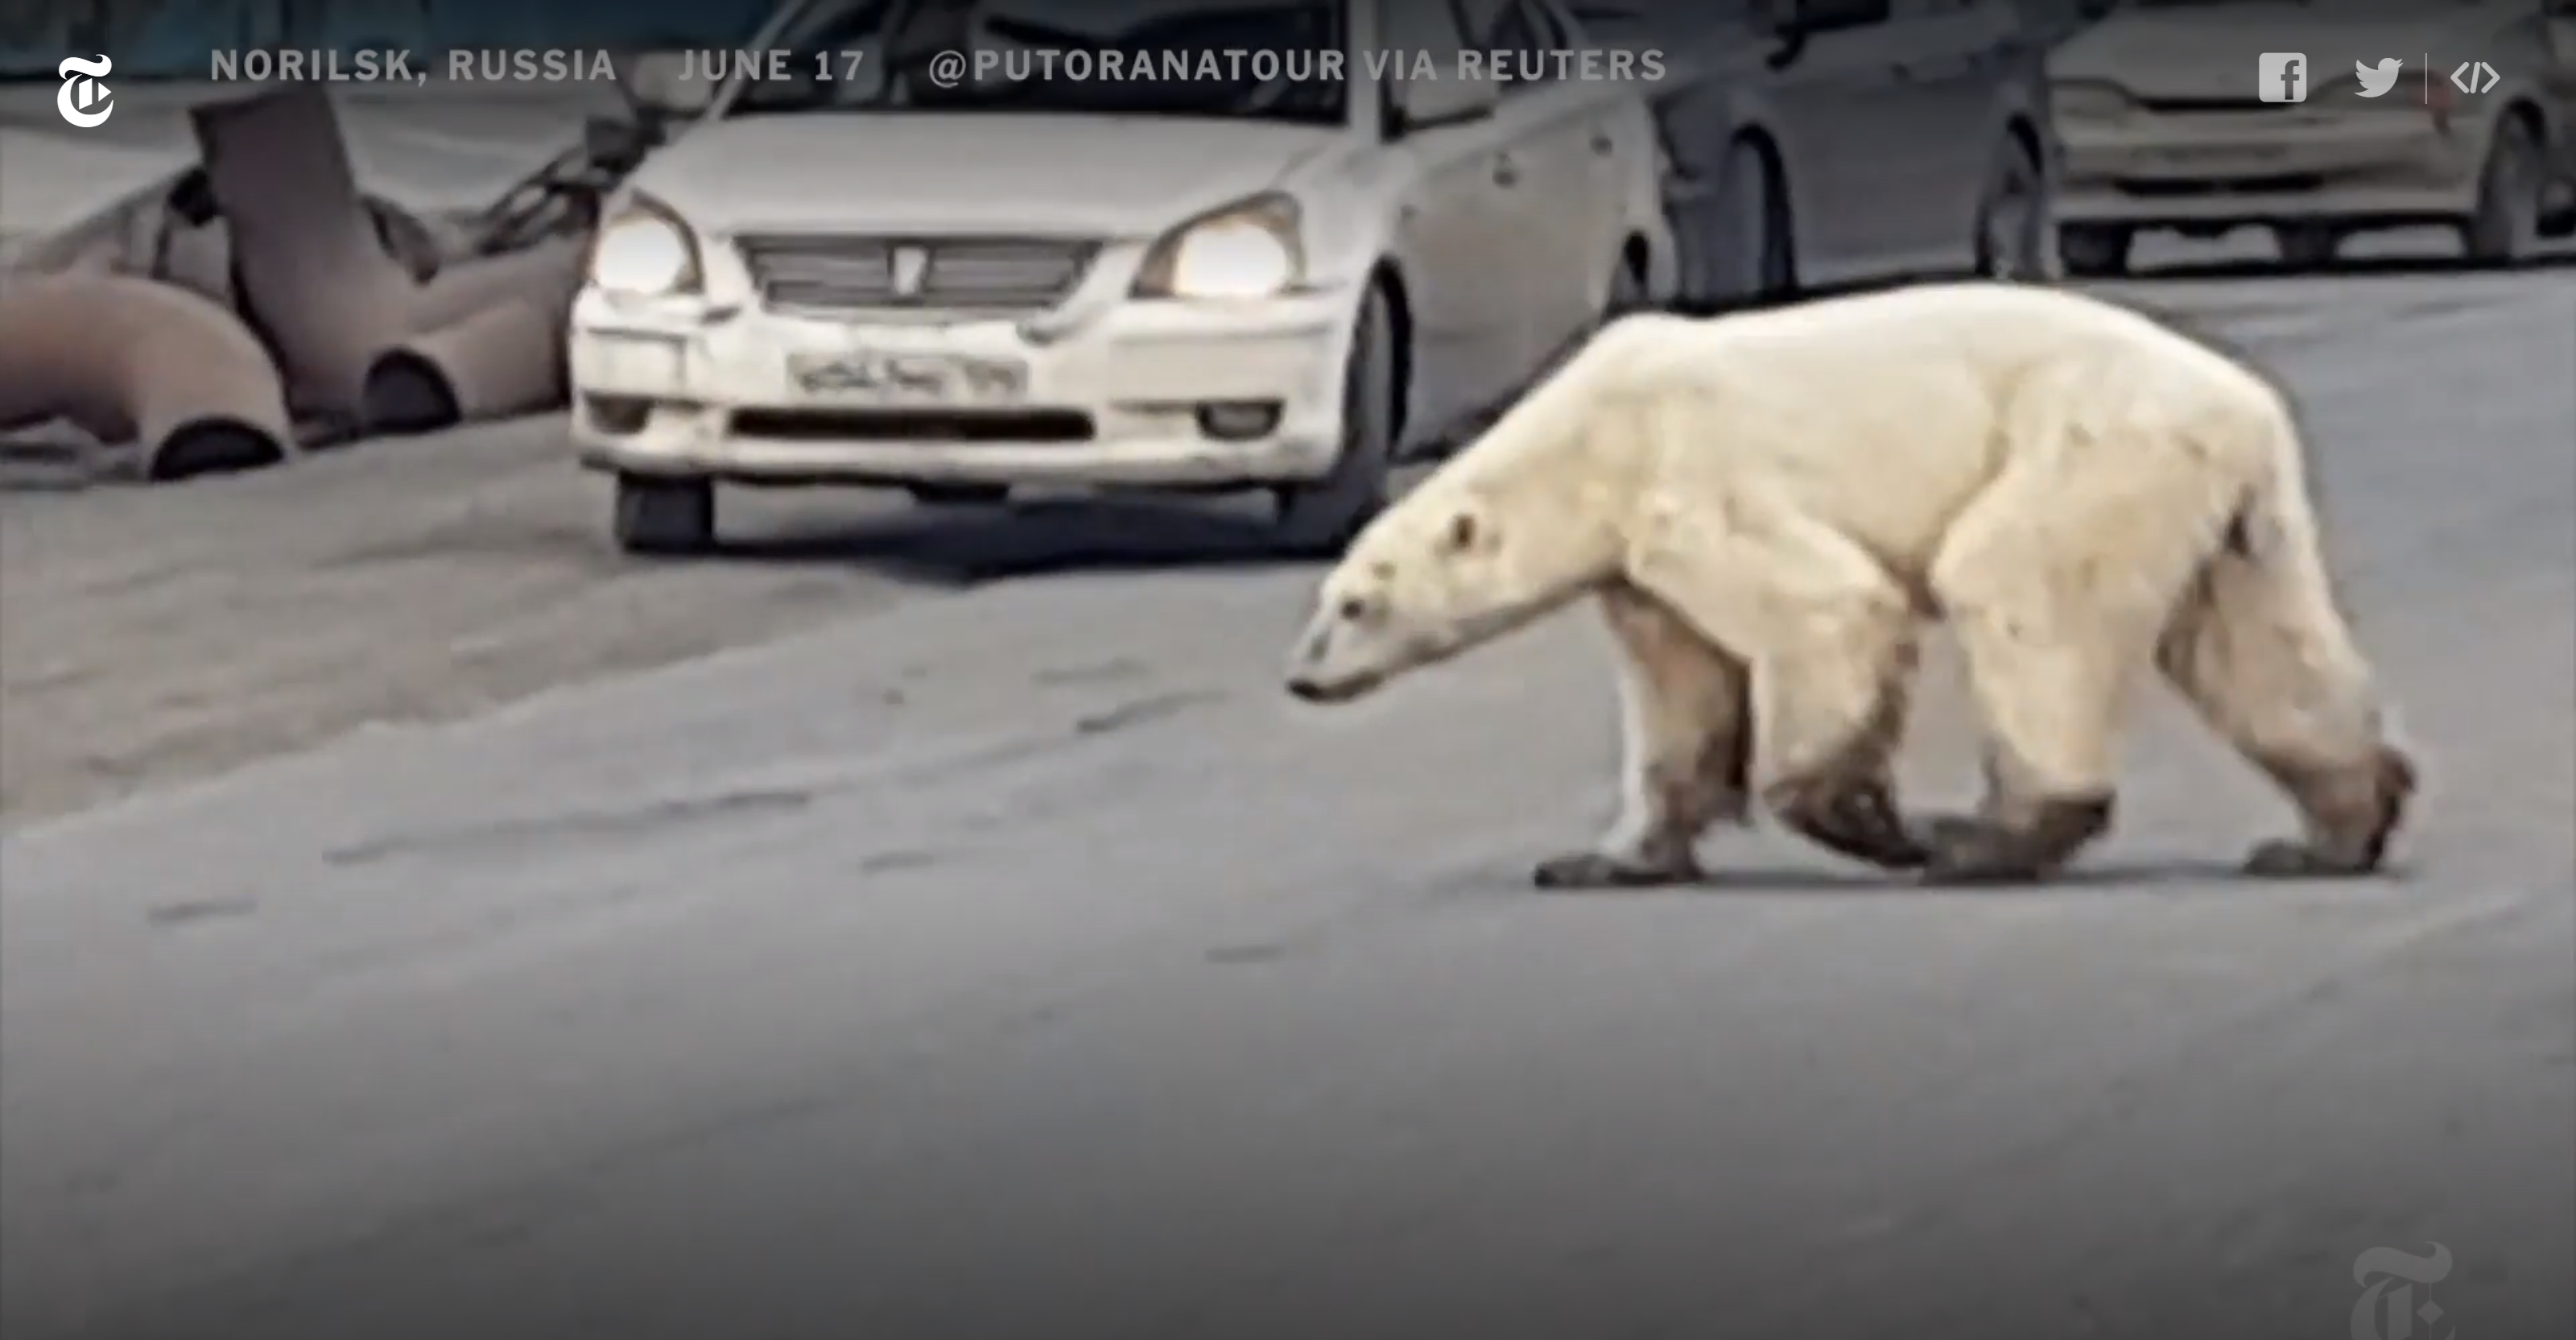 An emaciated polar bear wanders far from its natural habitat up north to the industrial city of Norilsk, Russia, scavenging for food, 17 June 2019. Photo: Putoranatour / Reuters